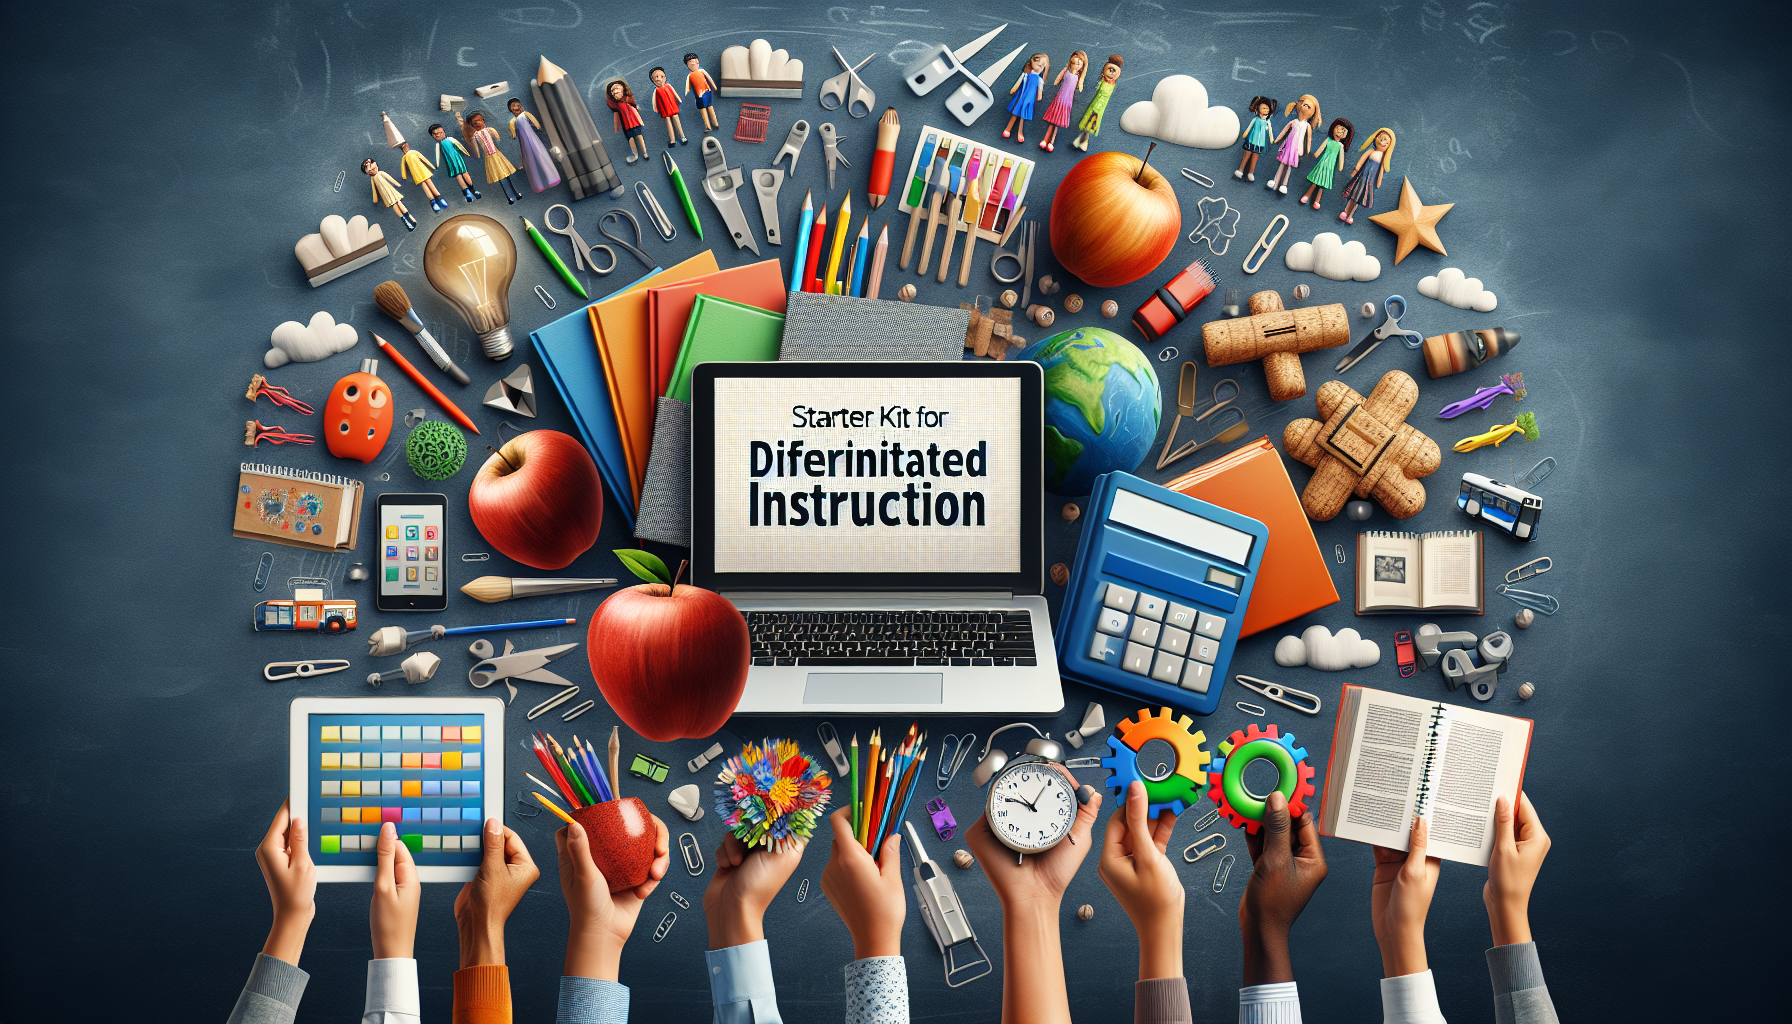 Ultimate Guide to a Differentiated Instruction Starter Kit for Teachers